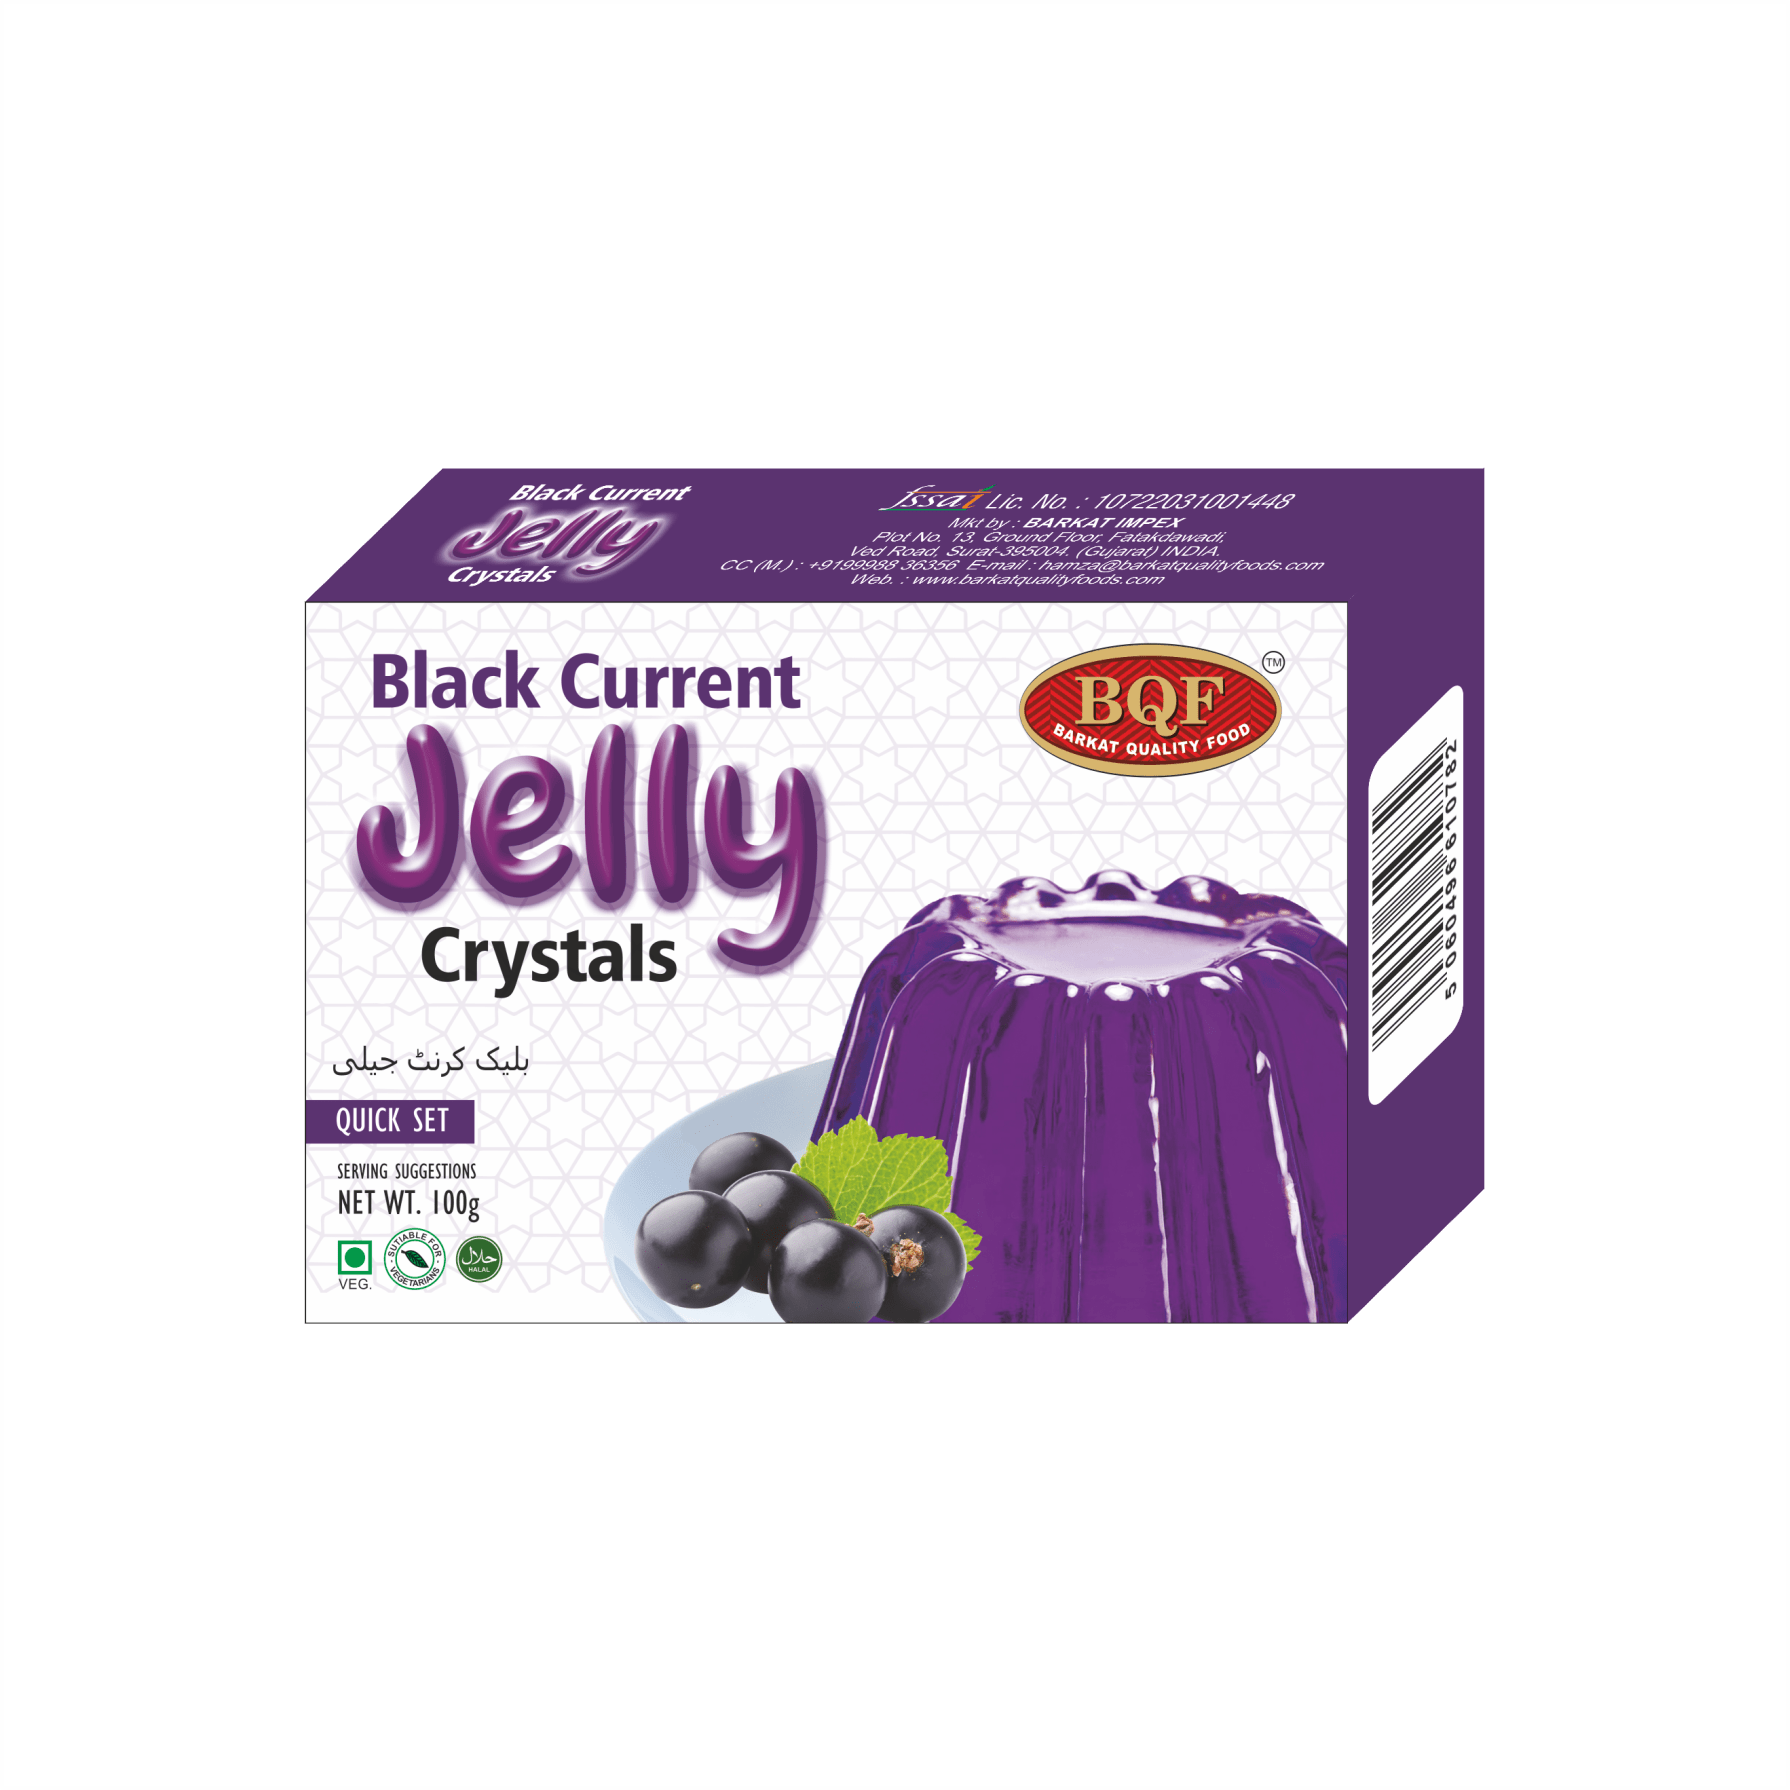 BLACK CURRENT JELLY